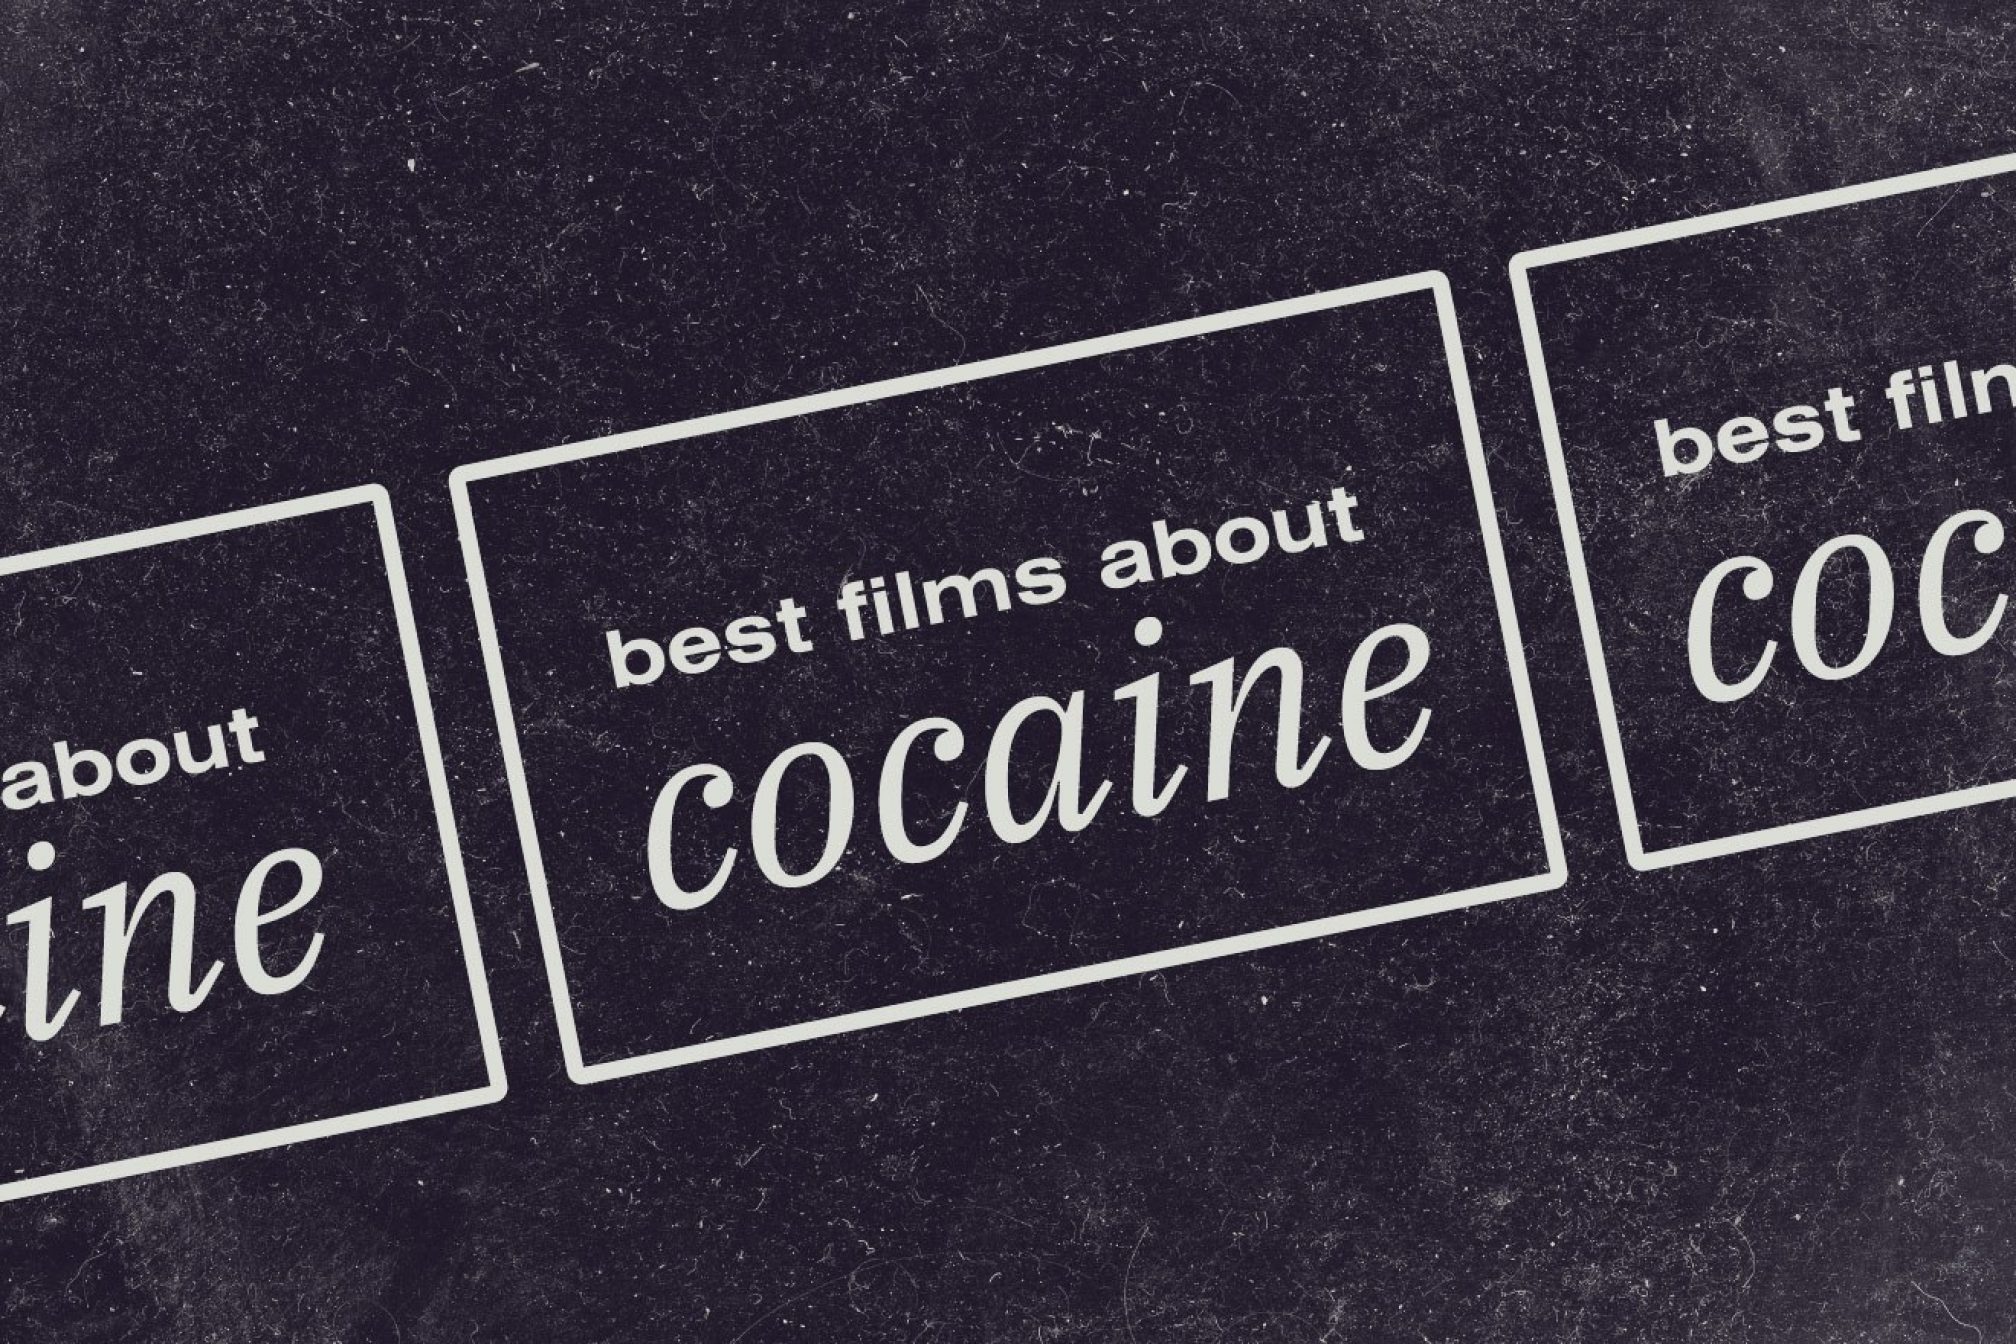 The 23 best films about cocaine - Features - Mixmag